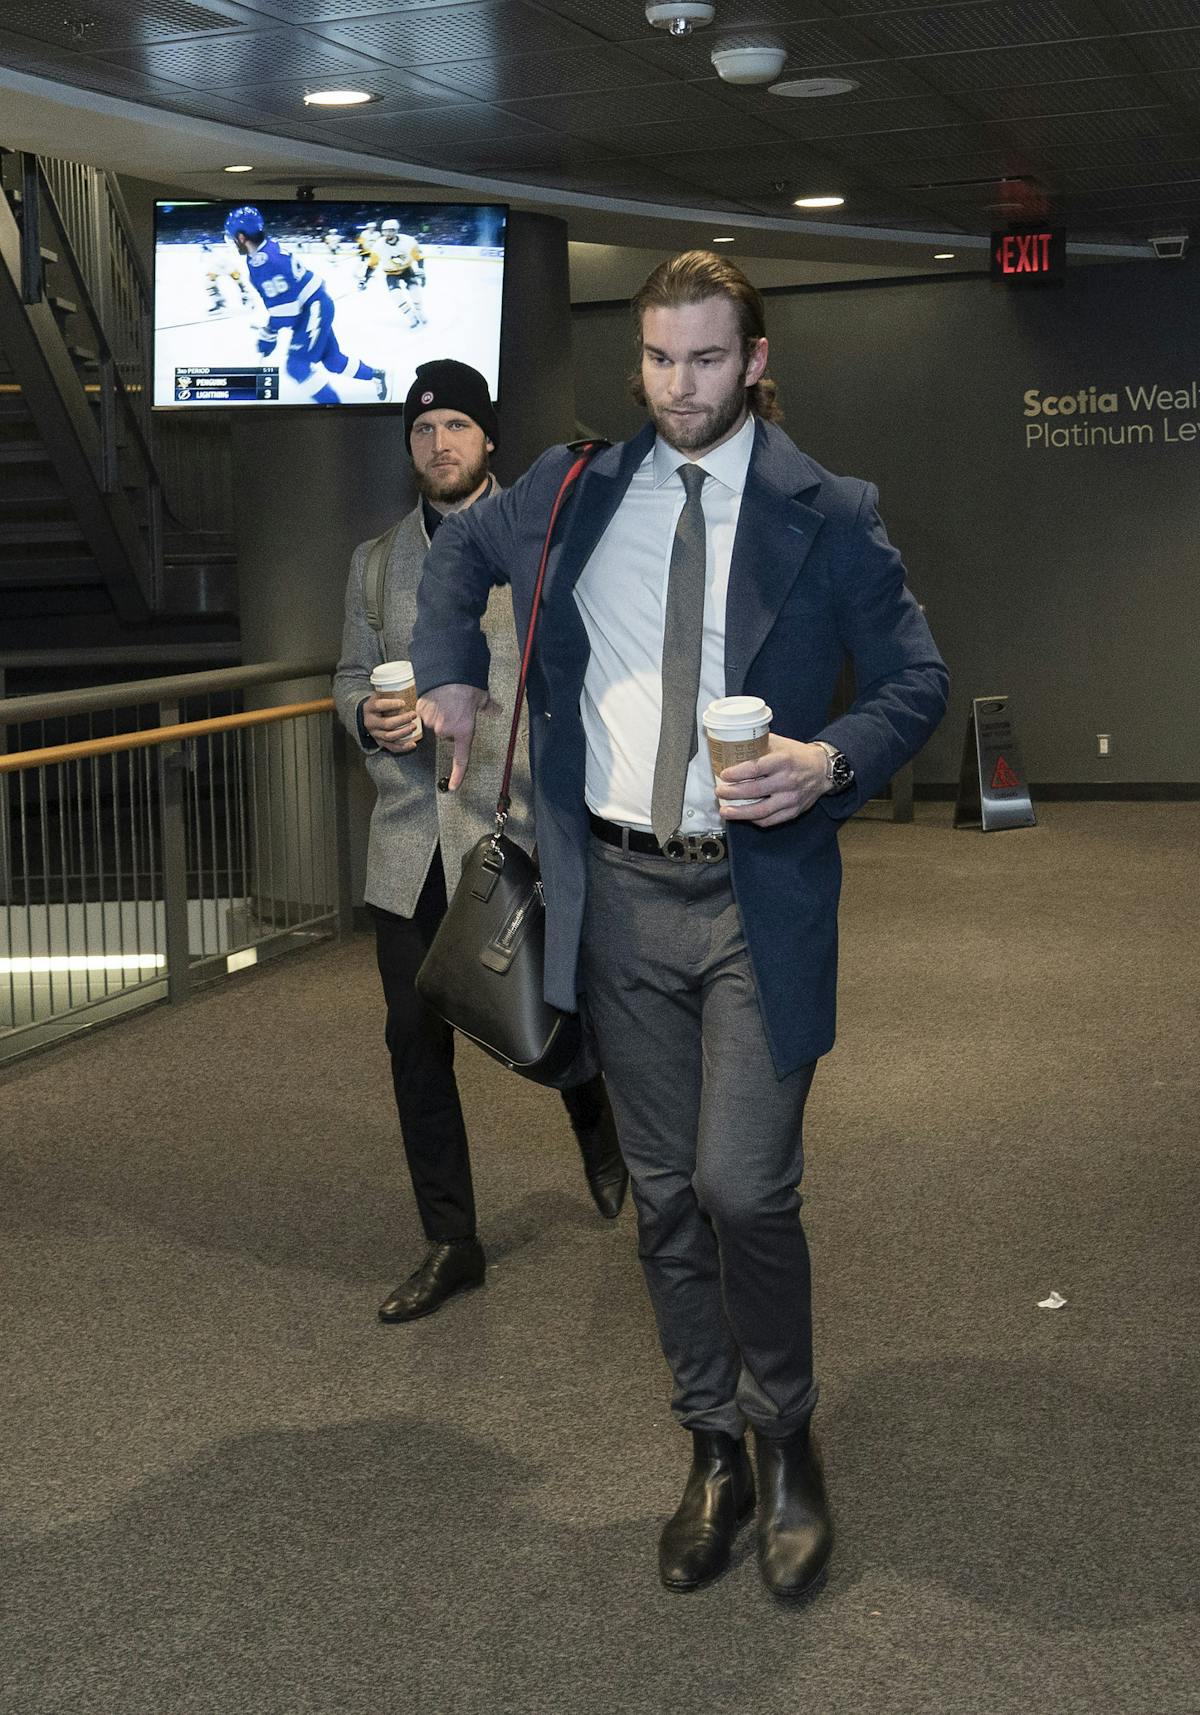 Why Do Hockey Players Wear Suit?